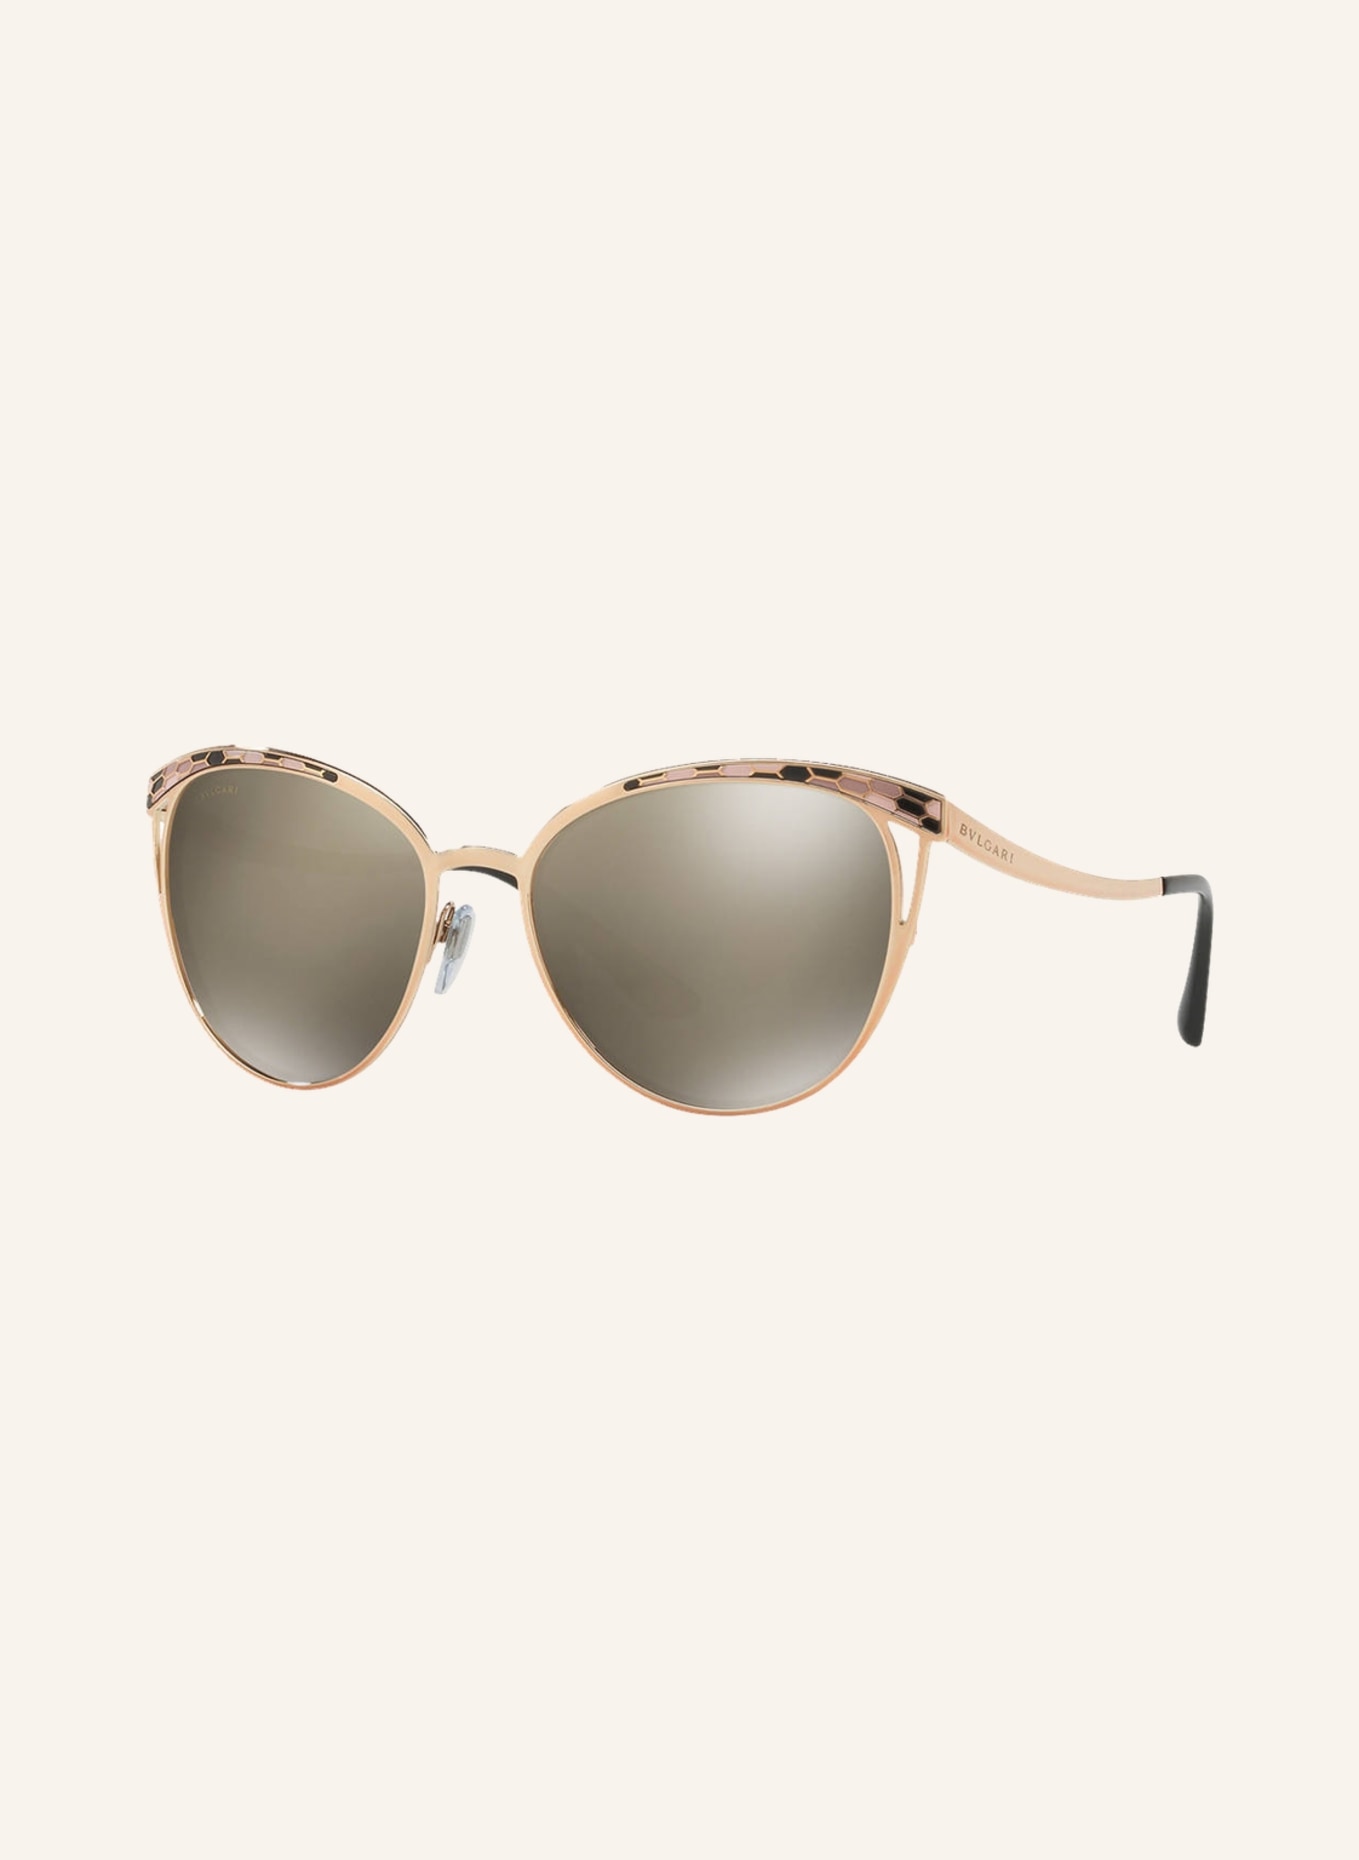 BVLGARI Sunglasses BV 6083, Color: 20145A - GOLD/LIGHT BROWN MIRRORED (Image 1)